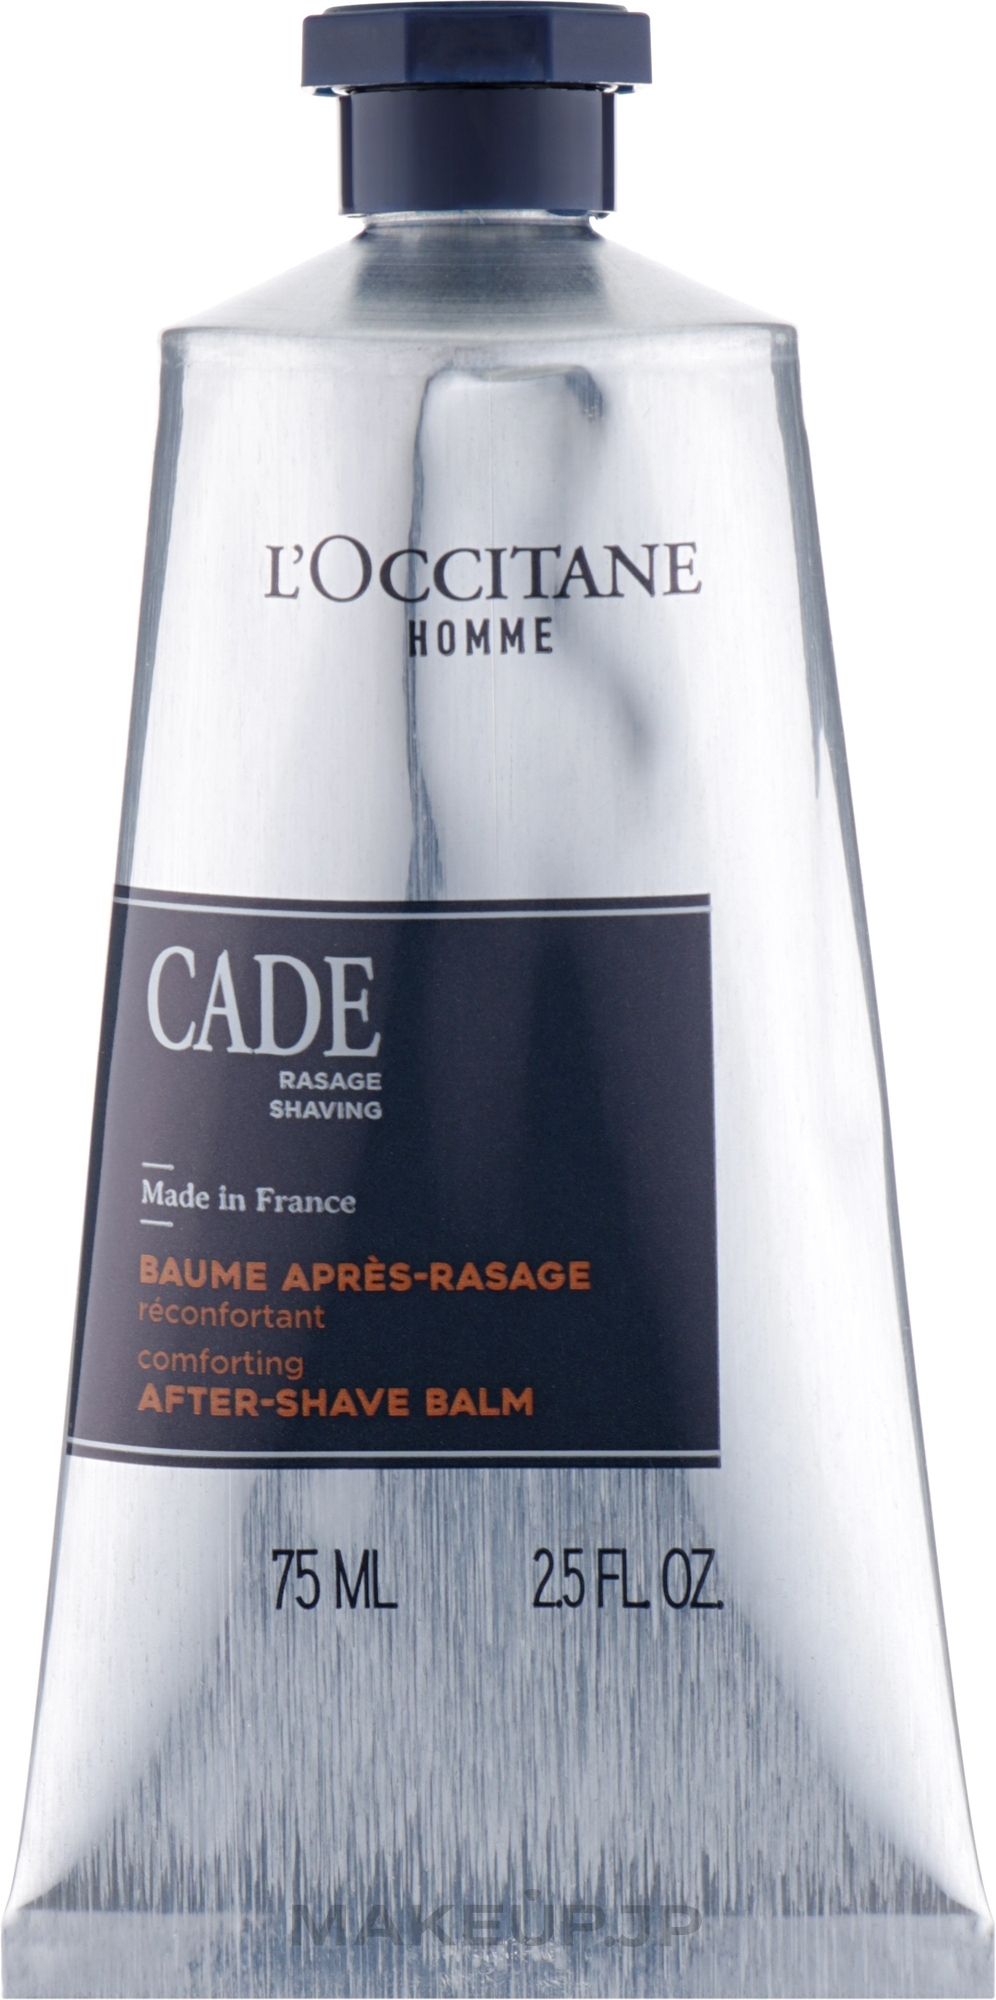 After Shave Balm - L'Occitane Cade After Shave Balm — photo 75 ml